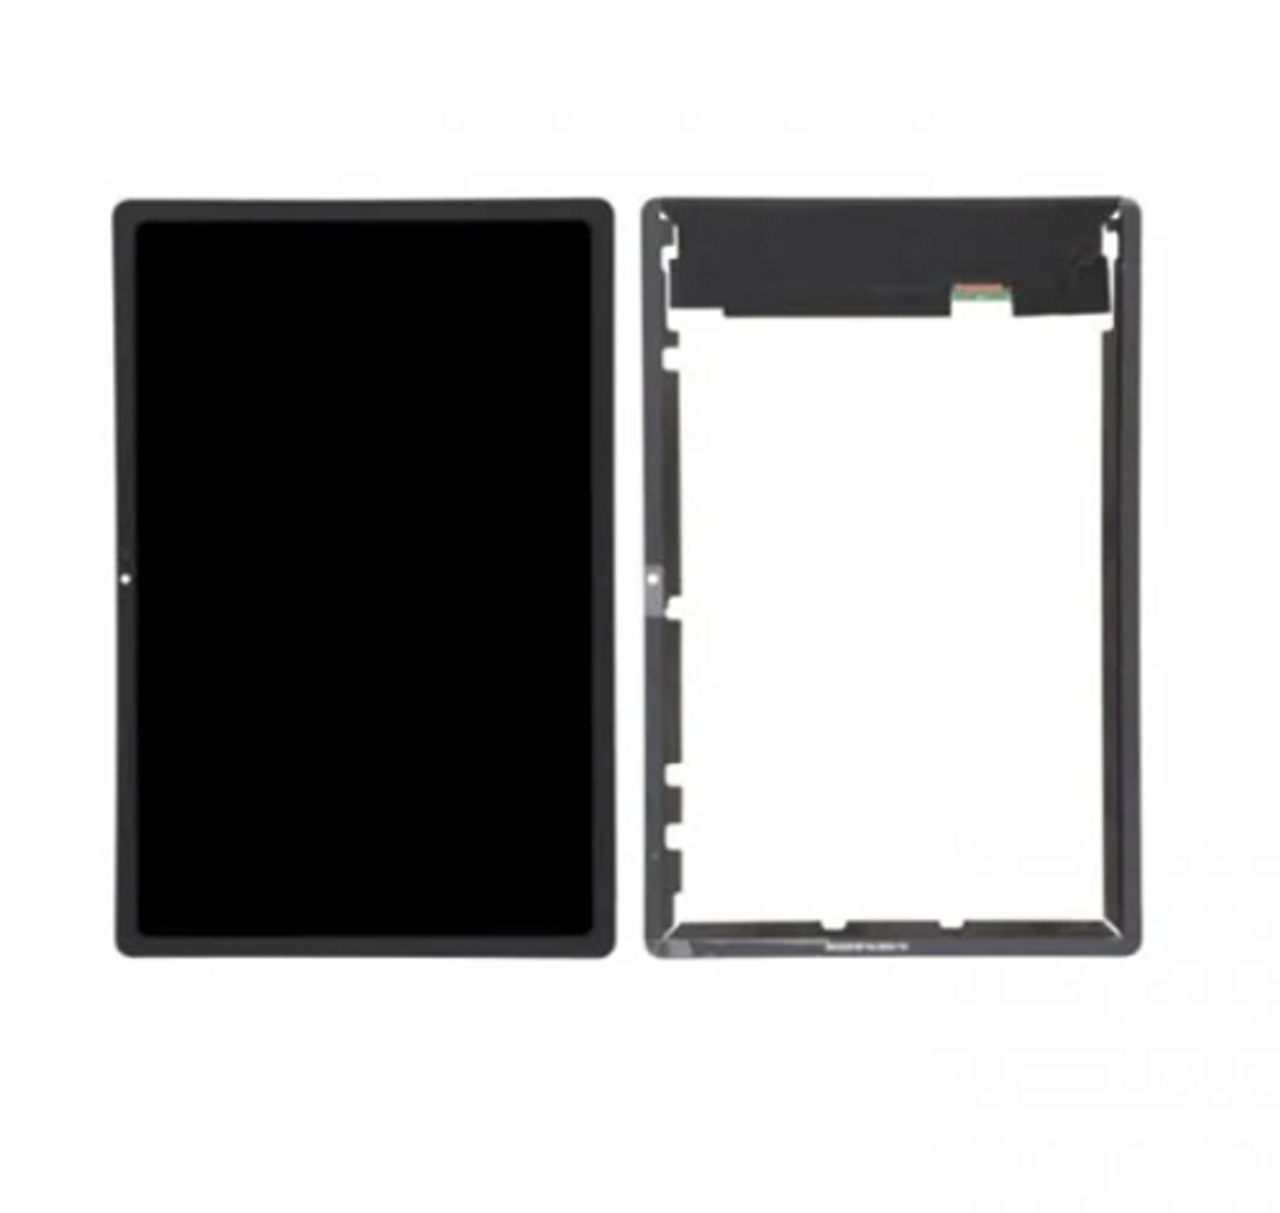 Samsung Galaxy Tab A7 SM-T500 / SM-T505 (2020) LCD and Touch Screen  Assembly (Black) - Westcoast Wholesalers Perth, Western Australia